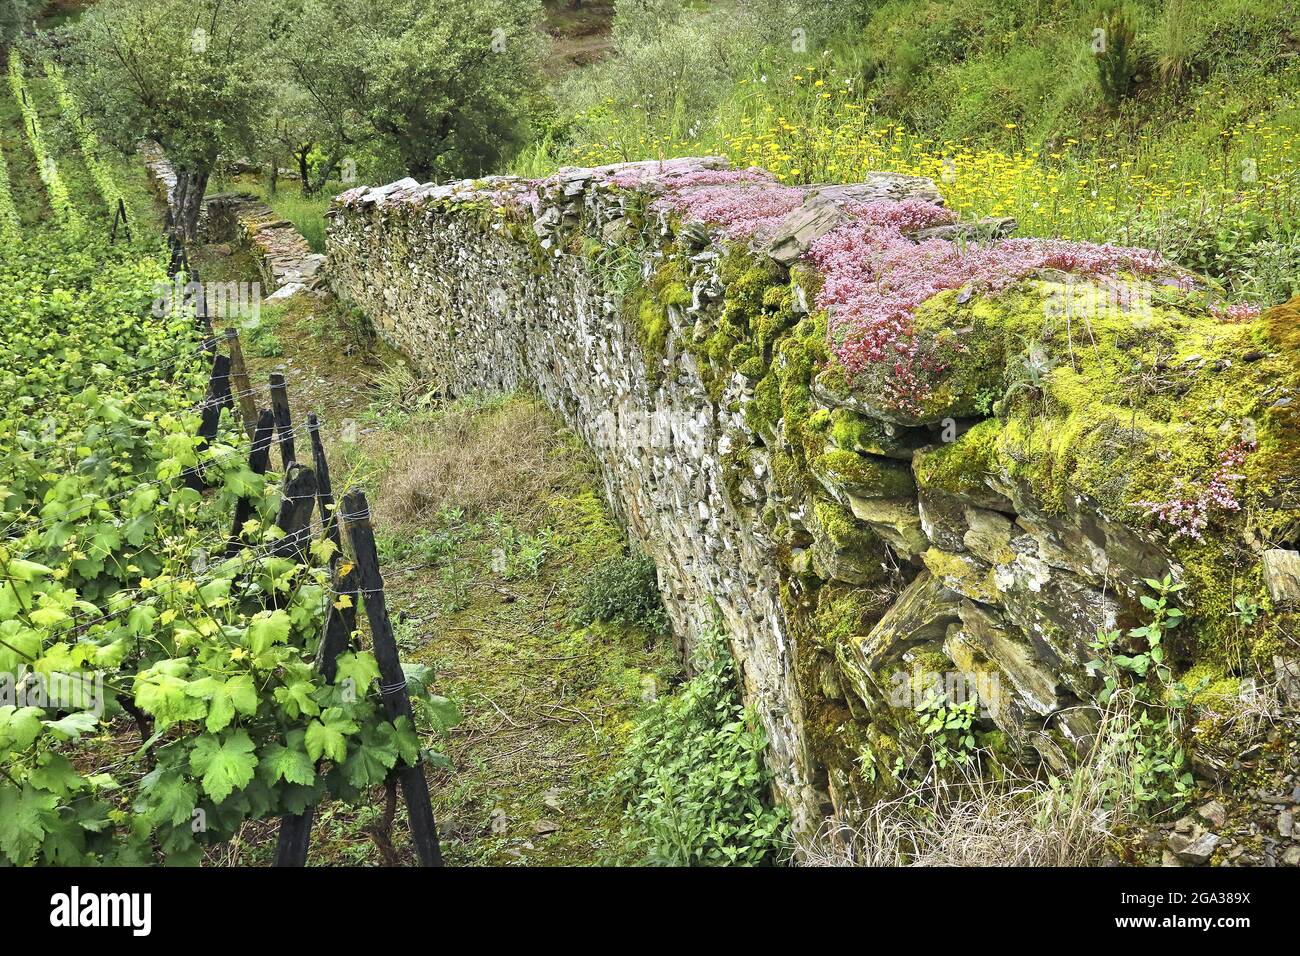 Rows of vines in a vineyard and a mossy stone wall with wildflowers, Douro Valley, near Obidos, Portugal; Portugal Stock Photo